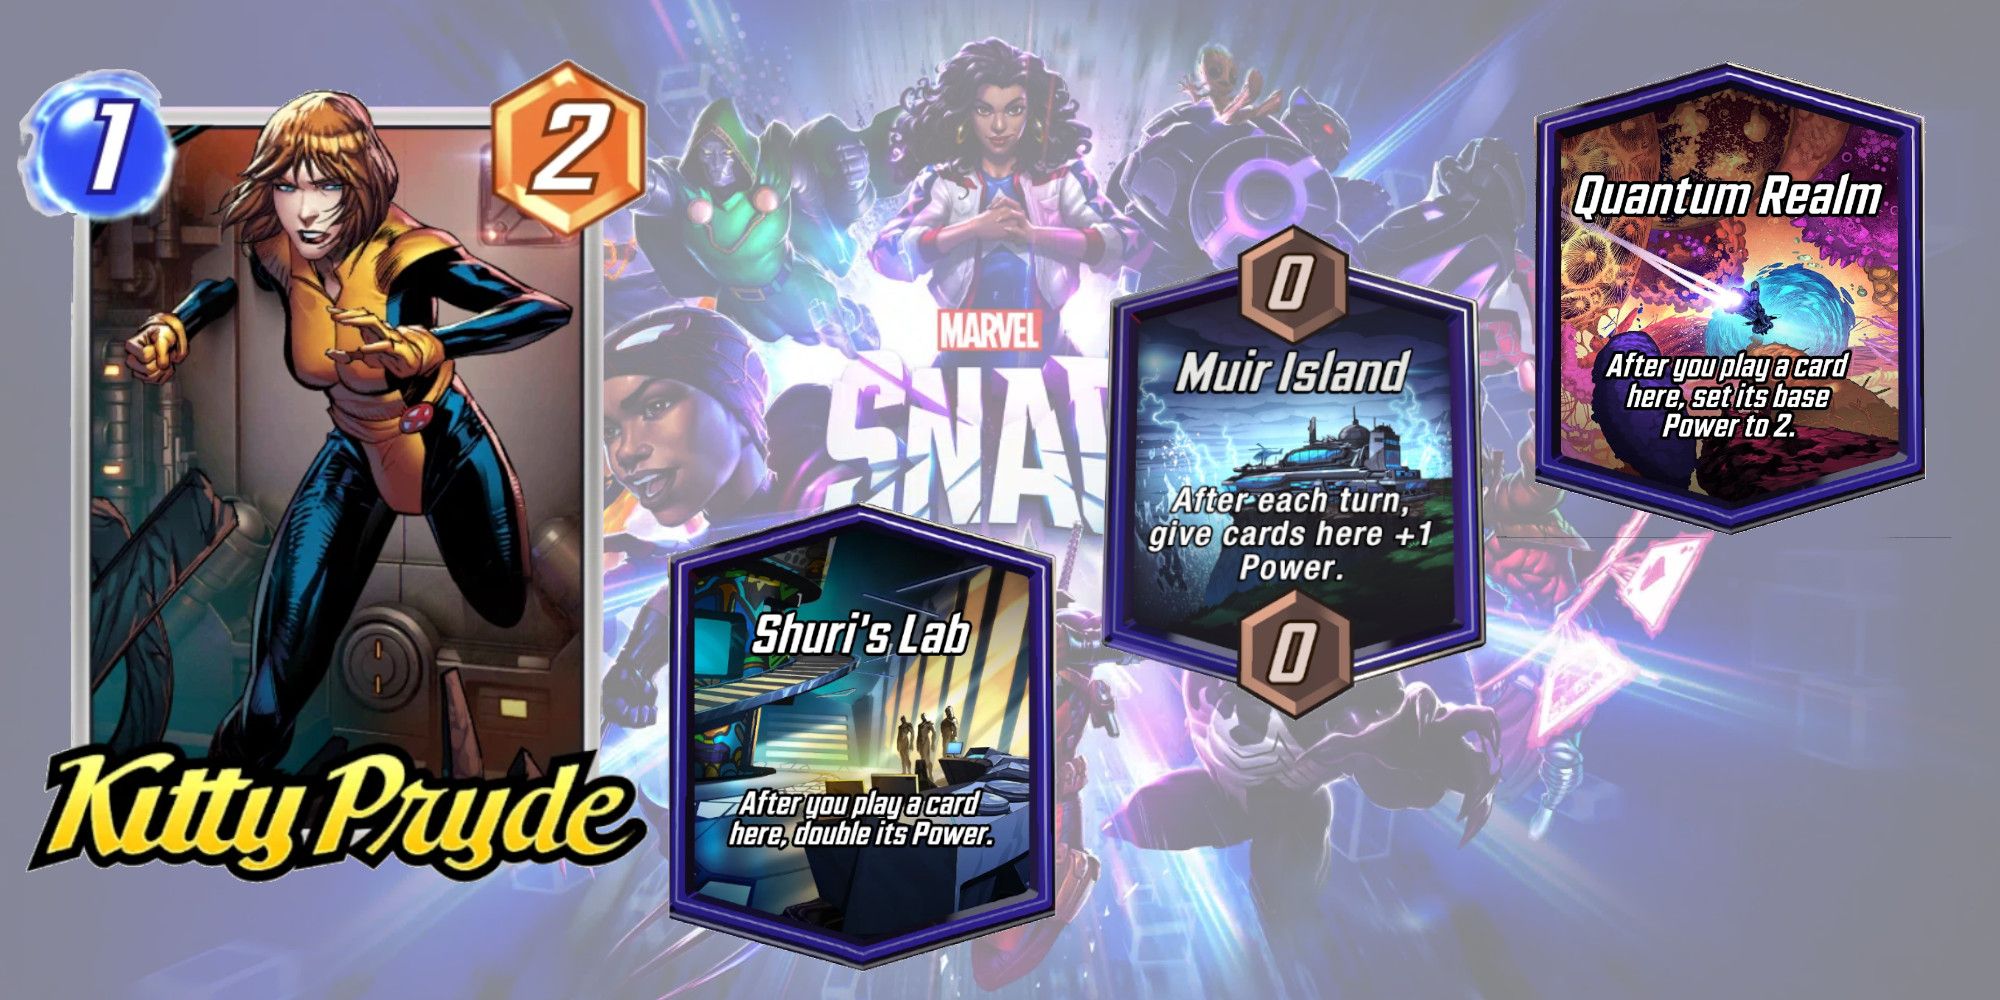 Marvel Snap Kitty Pryde Broken Combos Power-Up Locations Shuri's Lab, Muir Island, Quantum Realm